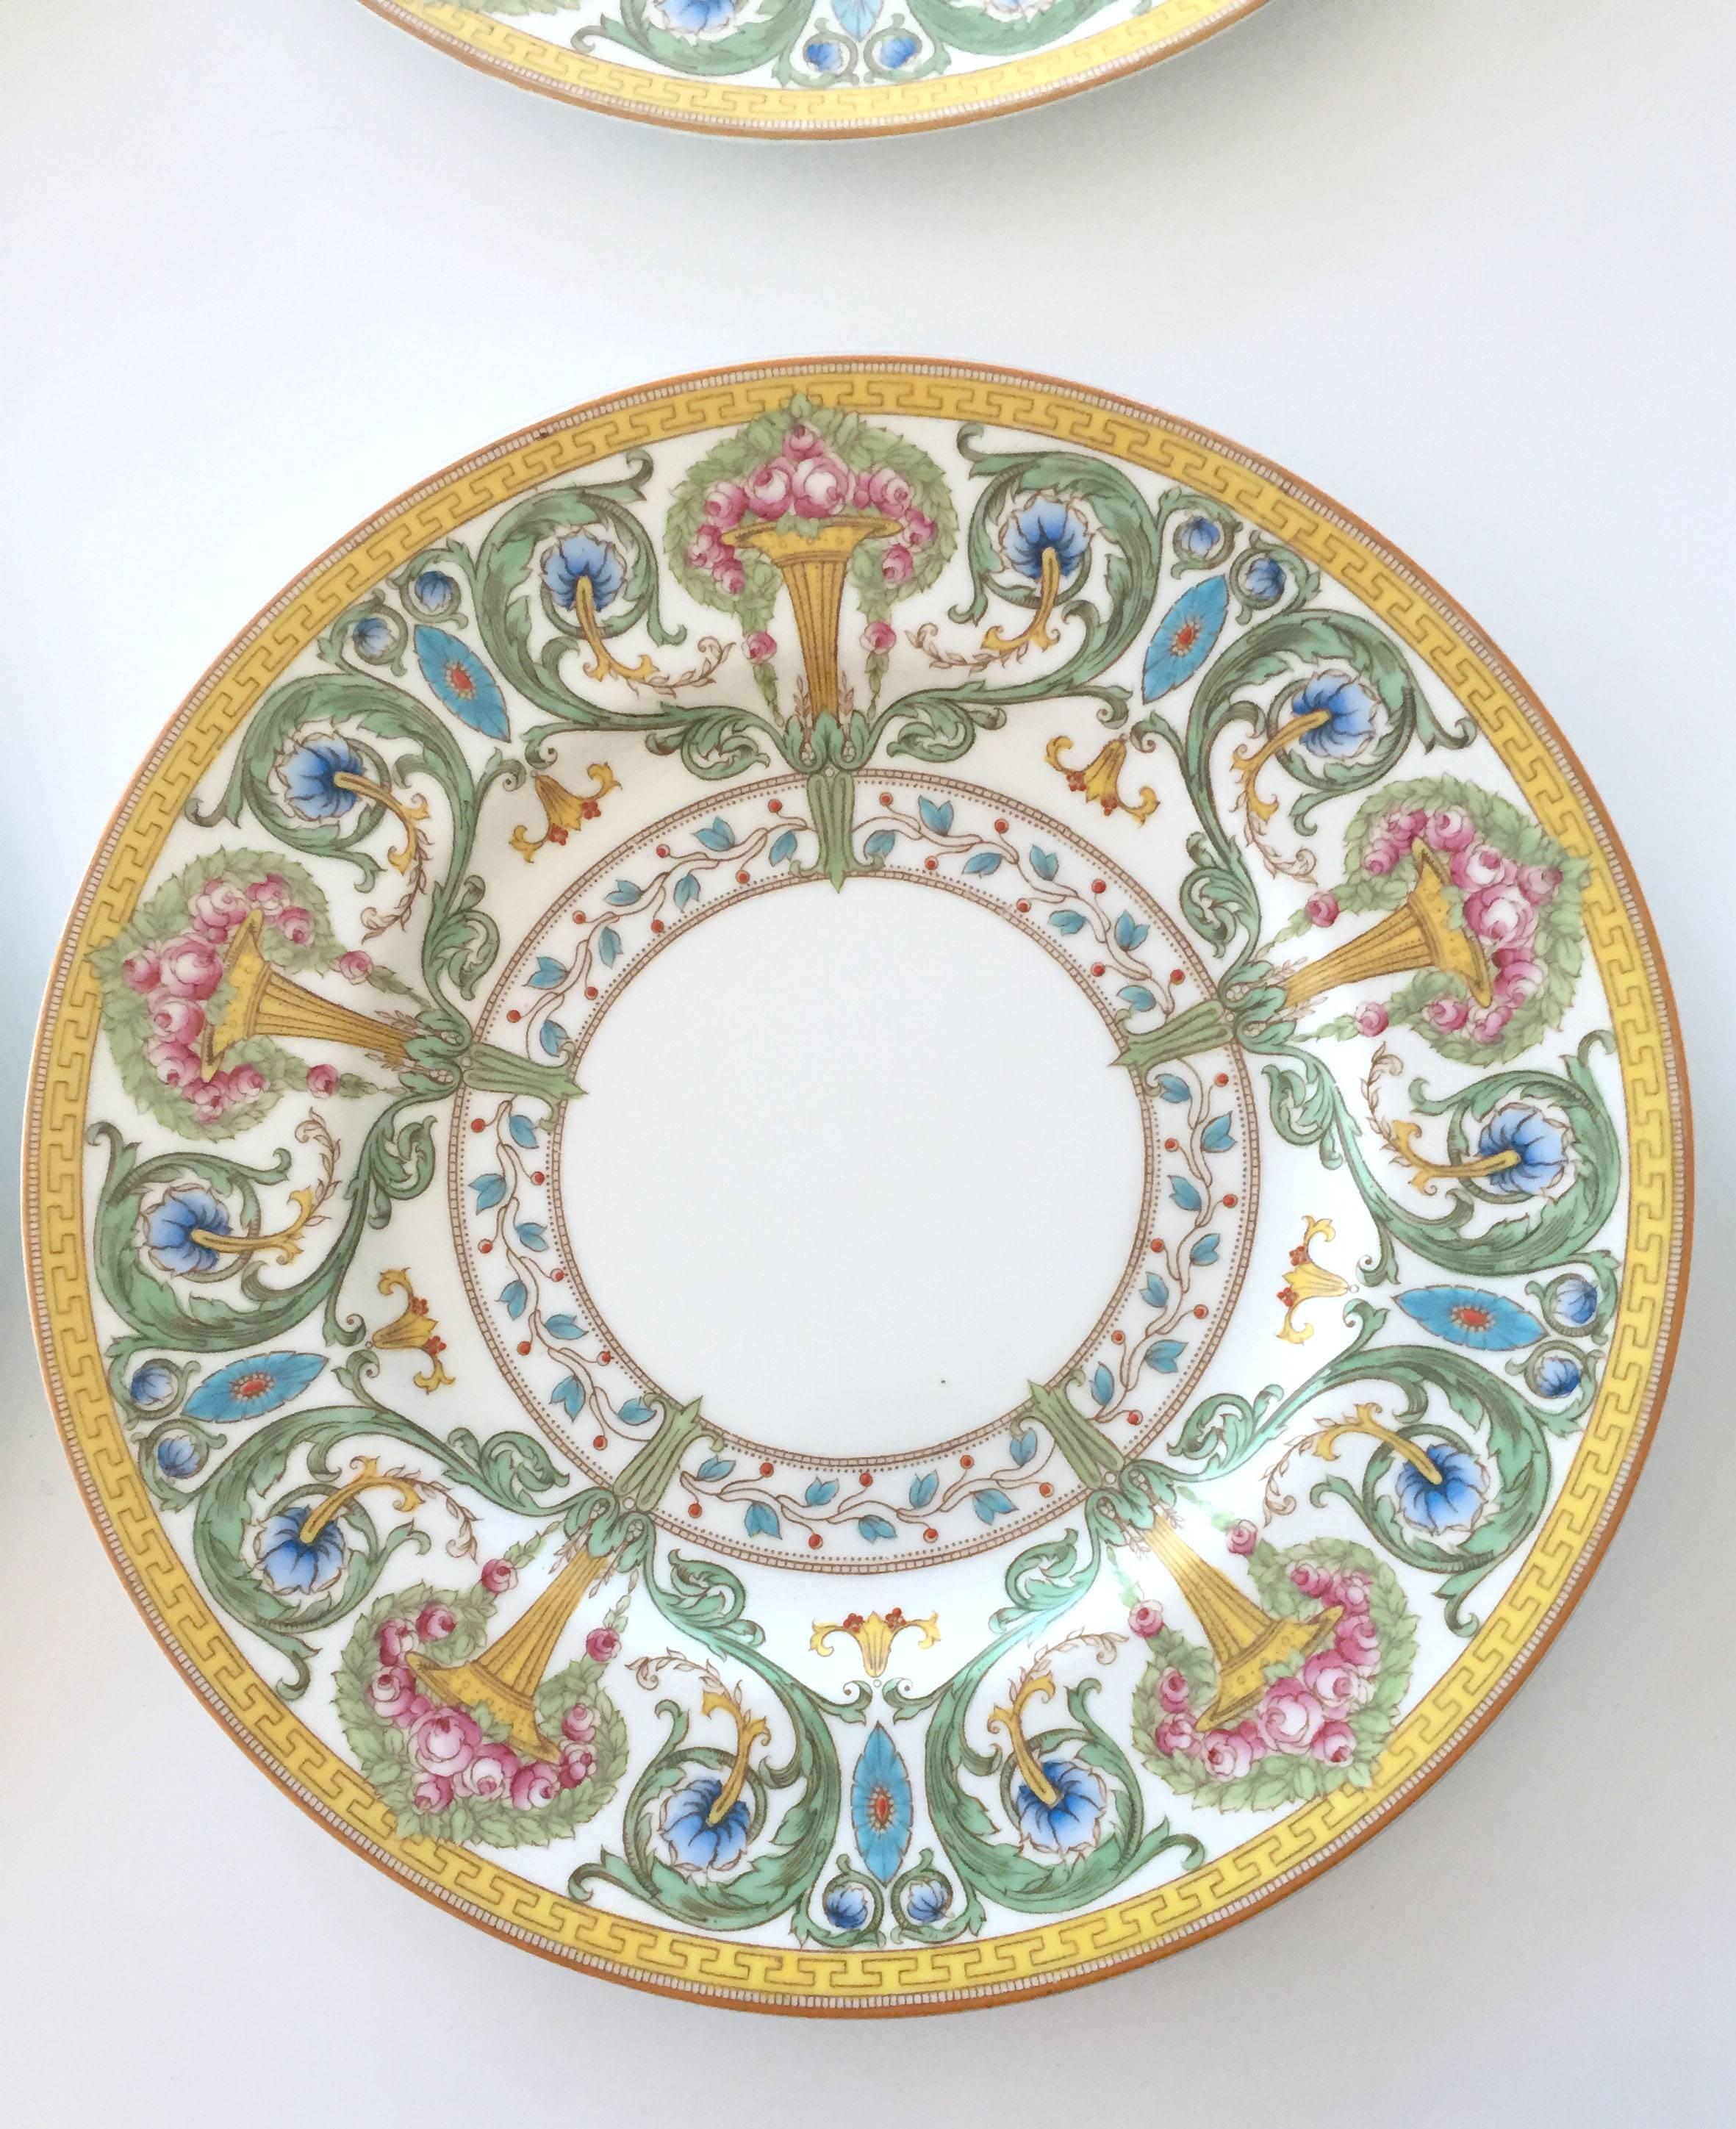 Set of eight Royal Worcester hand-painted plates, signed and numbered with slightly raised bouquets of roses in vases, surrounded by scrolling vines and flowers. The outer border in a Greek Key pattern and the inner border featuring scrolling flower